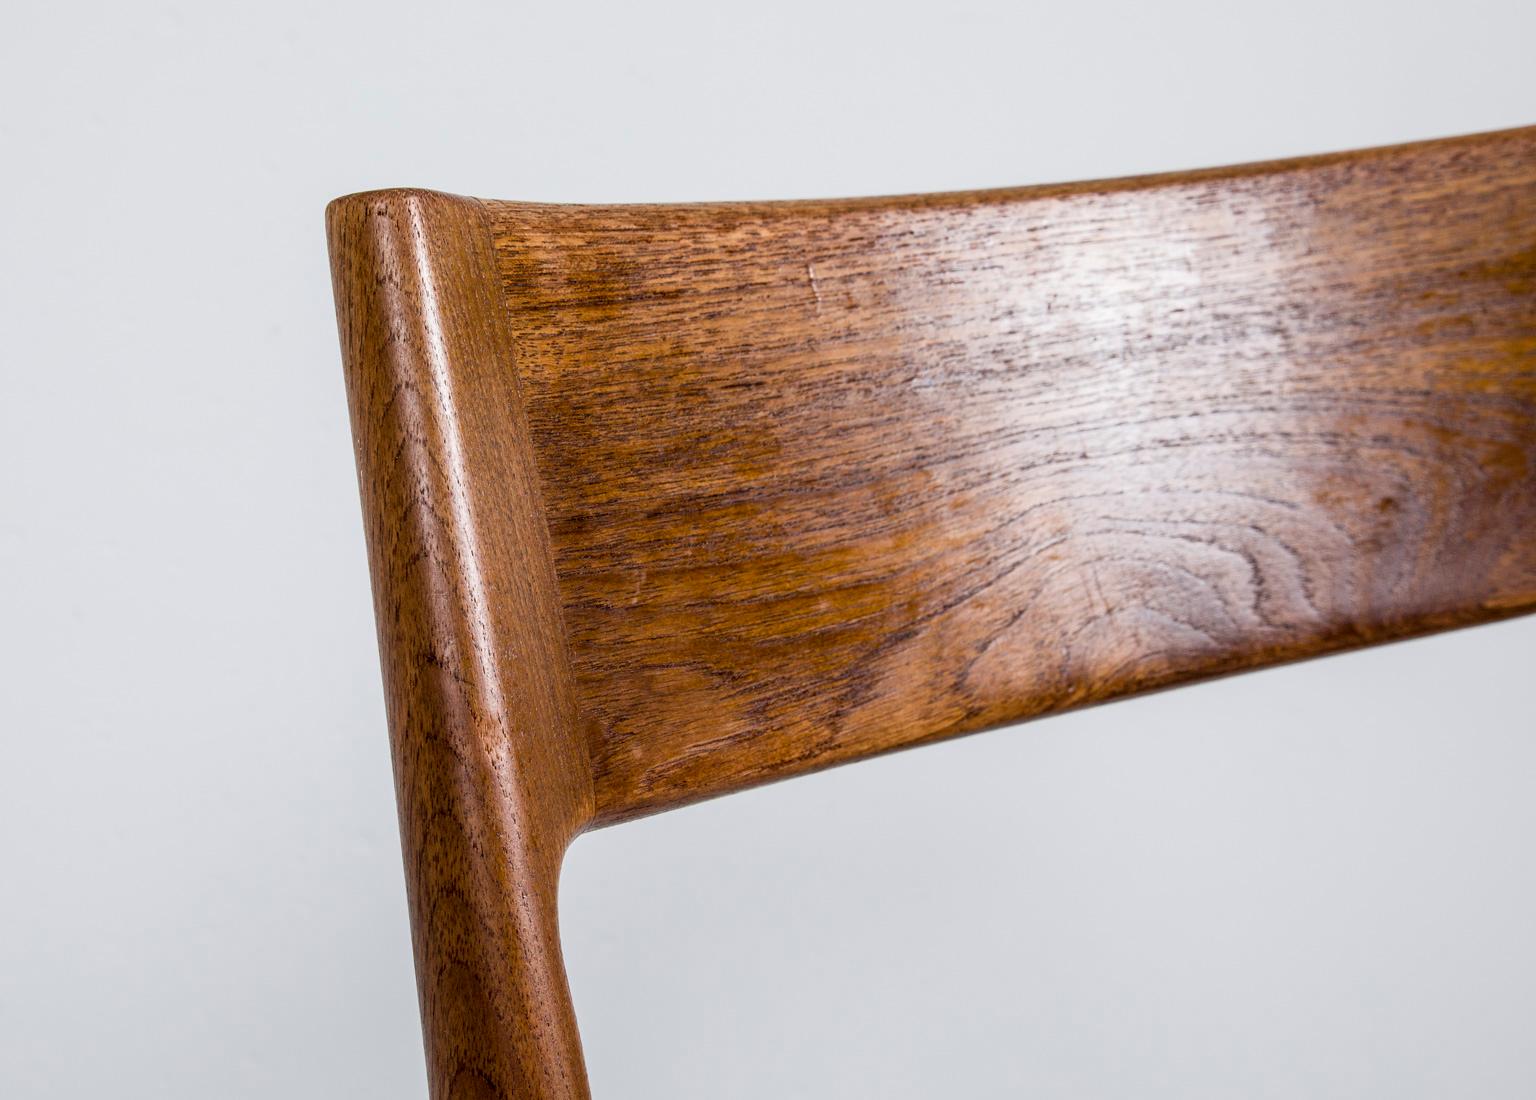 Mid-20th Century Teak Chair No. 77 by Niels Moller for Moller Models Denmark, 1960s For Sale